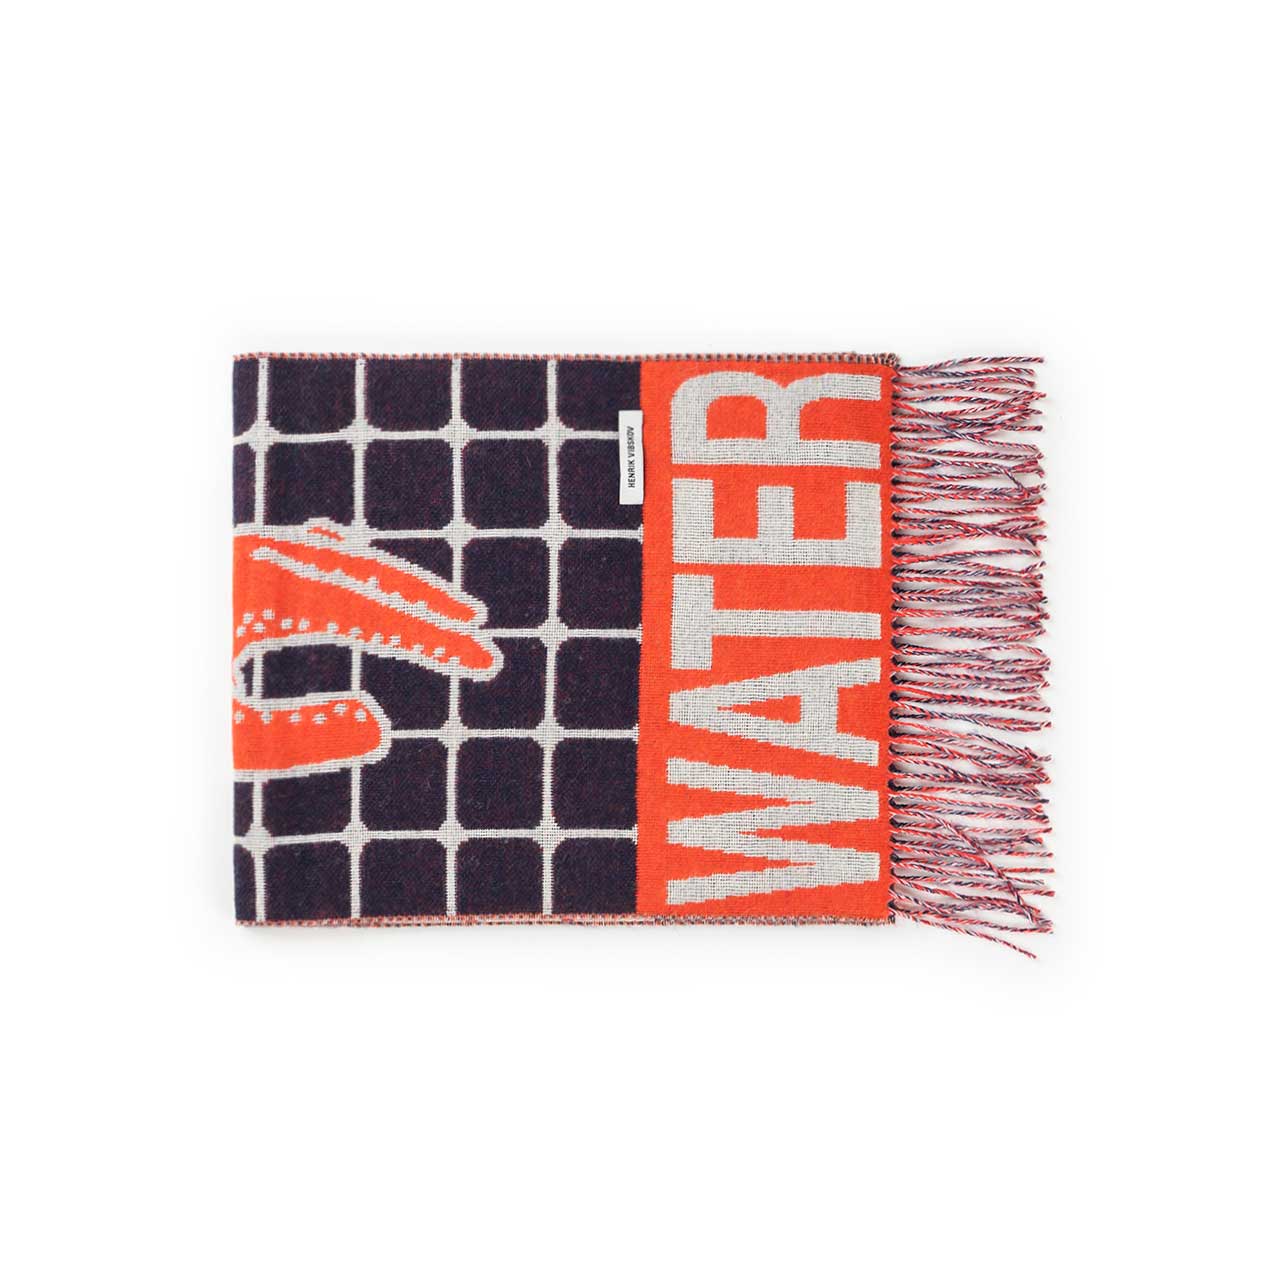 henrik vibskov hot water scarf - red gloves (red) - aw20-a905 - a.plus - Image - 1